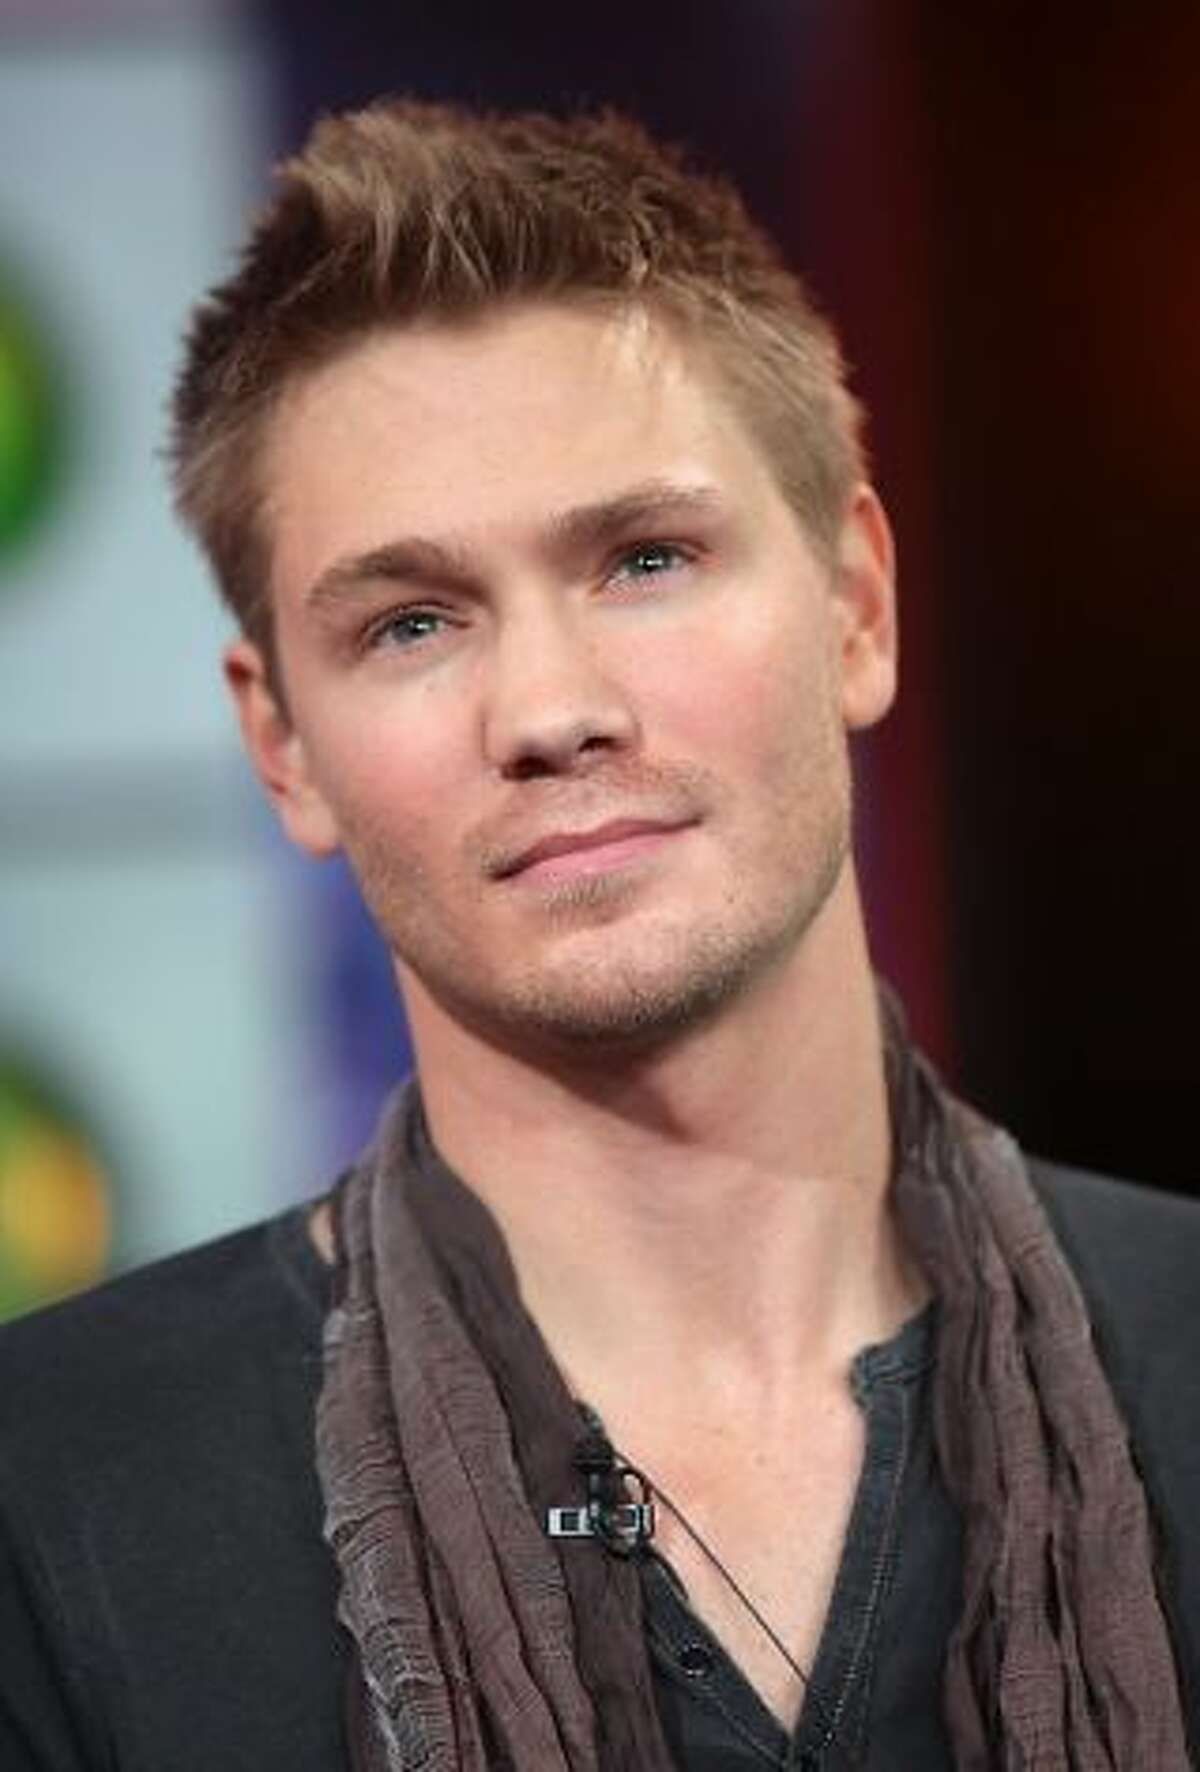 Chad Michael Murray, who will portray Colonel Mirabeau B. Lamar in the upcoming History Channel miniseries 'Texas Rising,' is best known for his leading role on teen drama, 'One Tree Hill.'